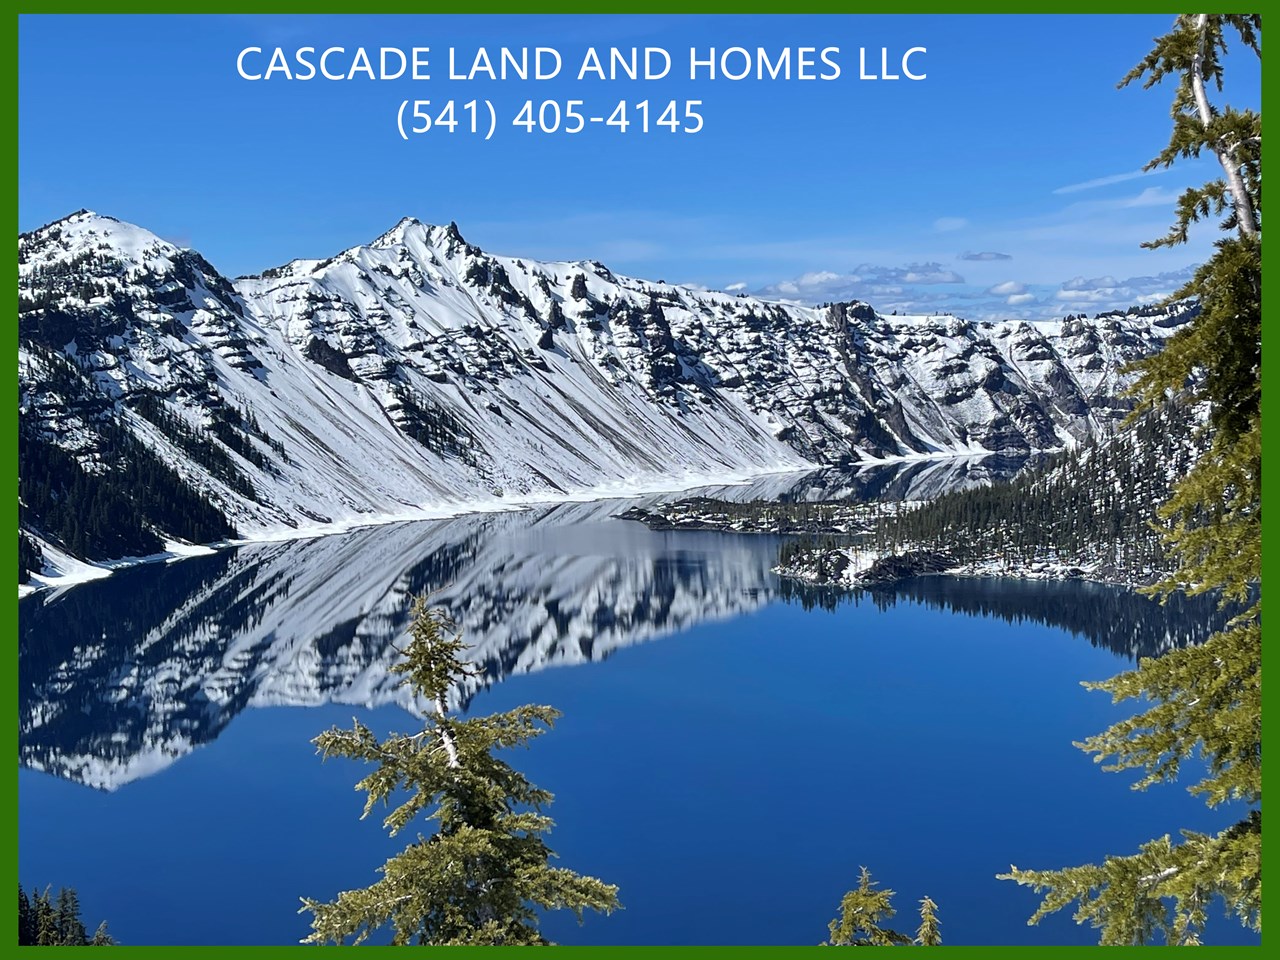 crater lake national park is about 45 minutes away! crater lake is the deepest lake in the us, and is fed from snowmelt, so it is crystal clear! the park has many hiking trails, camping spots, a resort, and so much beautiful mountain country to explore! the views from here are spectacular!